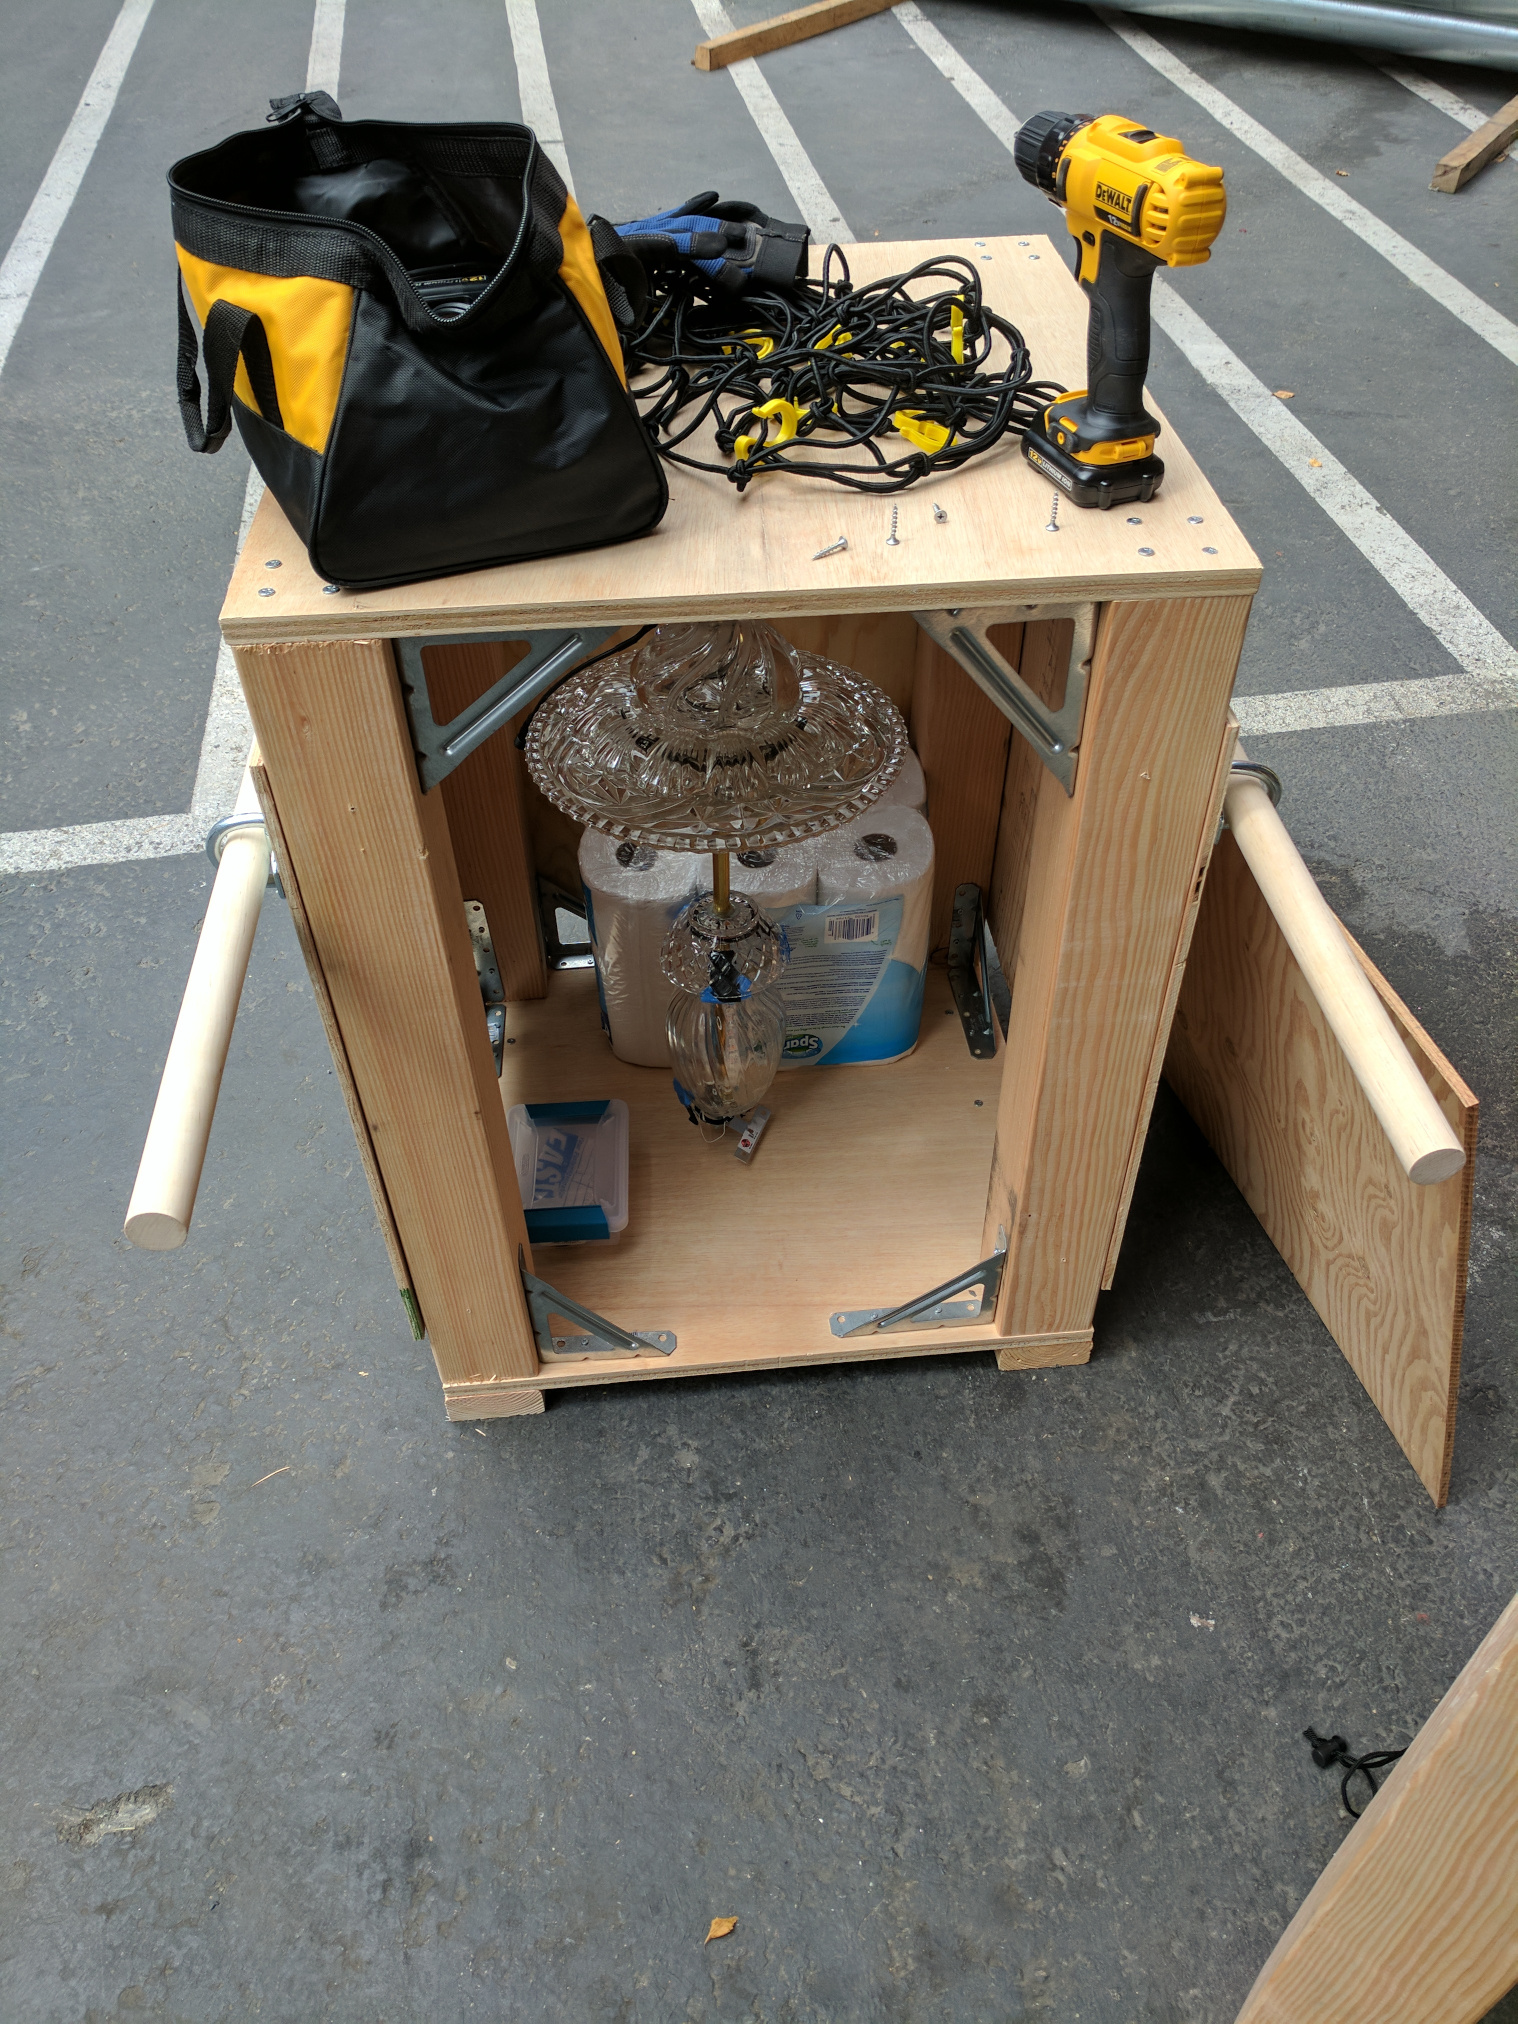 The crate, with 3 sides closed, sitting in a parking lot.  The lantern hangs inside, braced by a 12 pack of toilet paper. Tools sit on top of the crate.